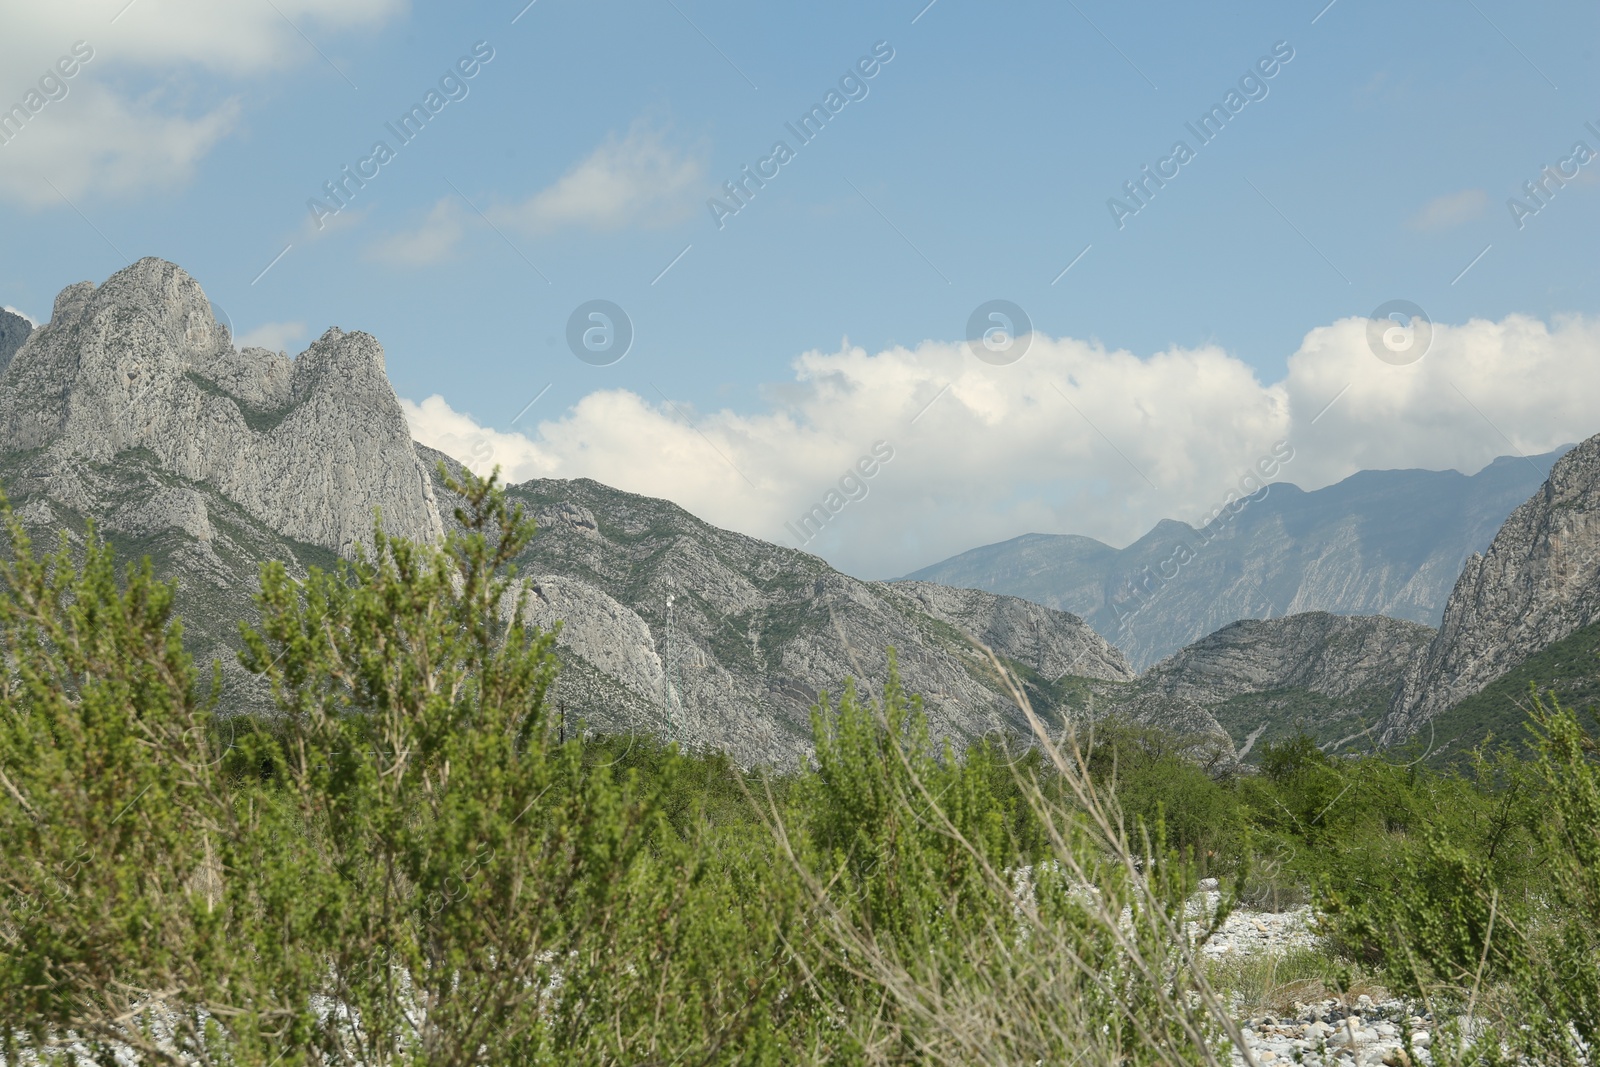 Photo of Picturesque view of beautiful mountains and plants under cloudy sky